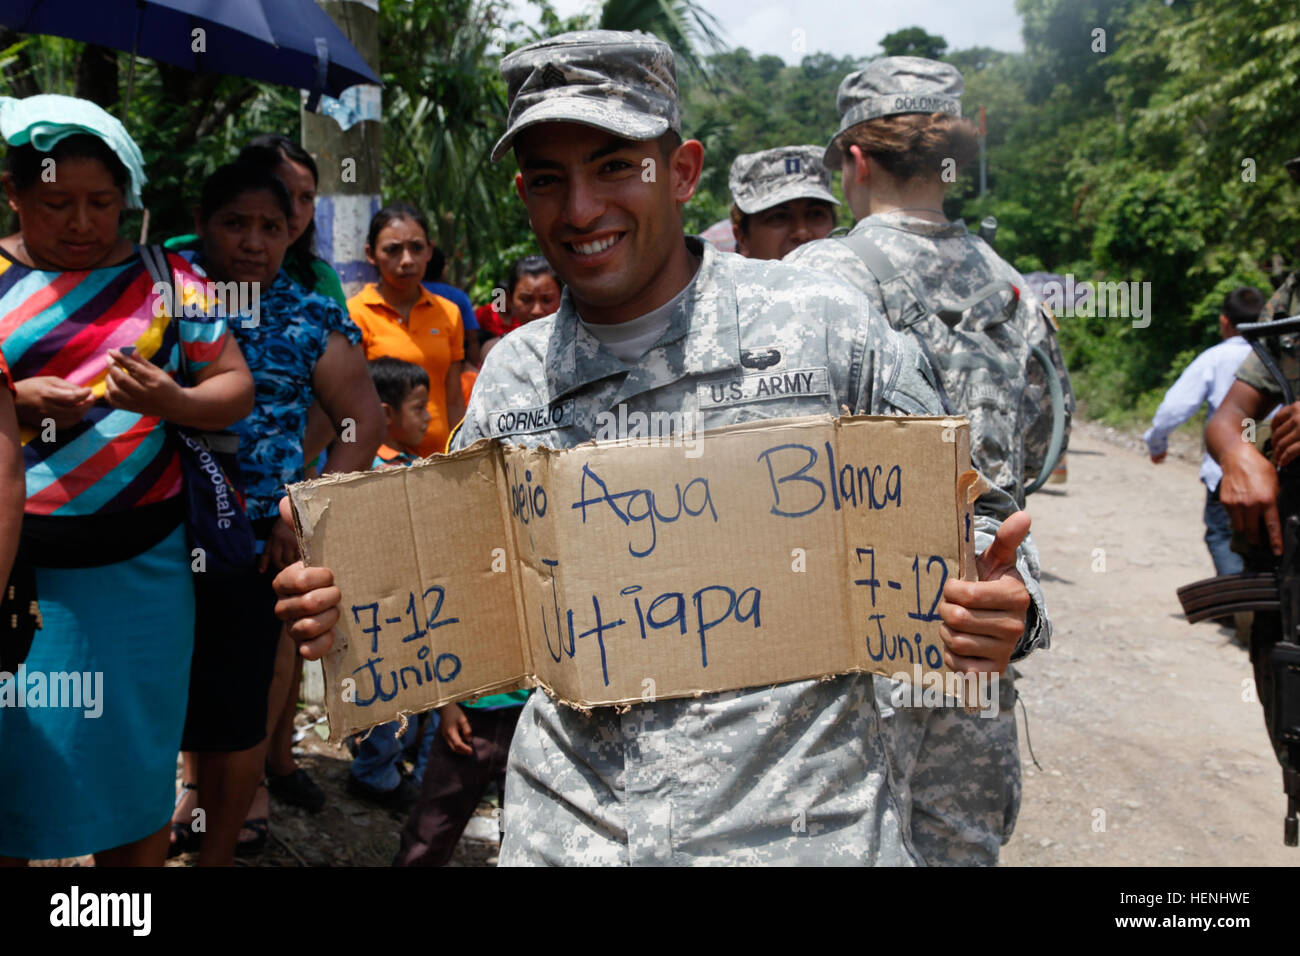 U.S. Army Sgt. Julian Cornejo with 349th Combat Support Hospital informs Guatemalan citizens of an upcoming Medical Readiness Training Exercise during Beyond the Horizon, at Rio Grande, Guatemala, on June 3, 2014. Beyond the Horizon is an annual exercise that embraces the partnership between the United States and Guatemala, to provide focused humanitarian assistance through various medical, dental, and civic action programs. (U.S. Army photo by Pfc. Josue Mayorga/released) Beyond The Horizon 2014, Guatemala 140603-A-GK700-086 Stock Photo